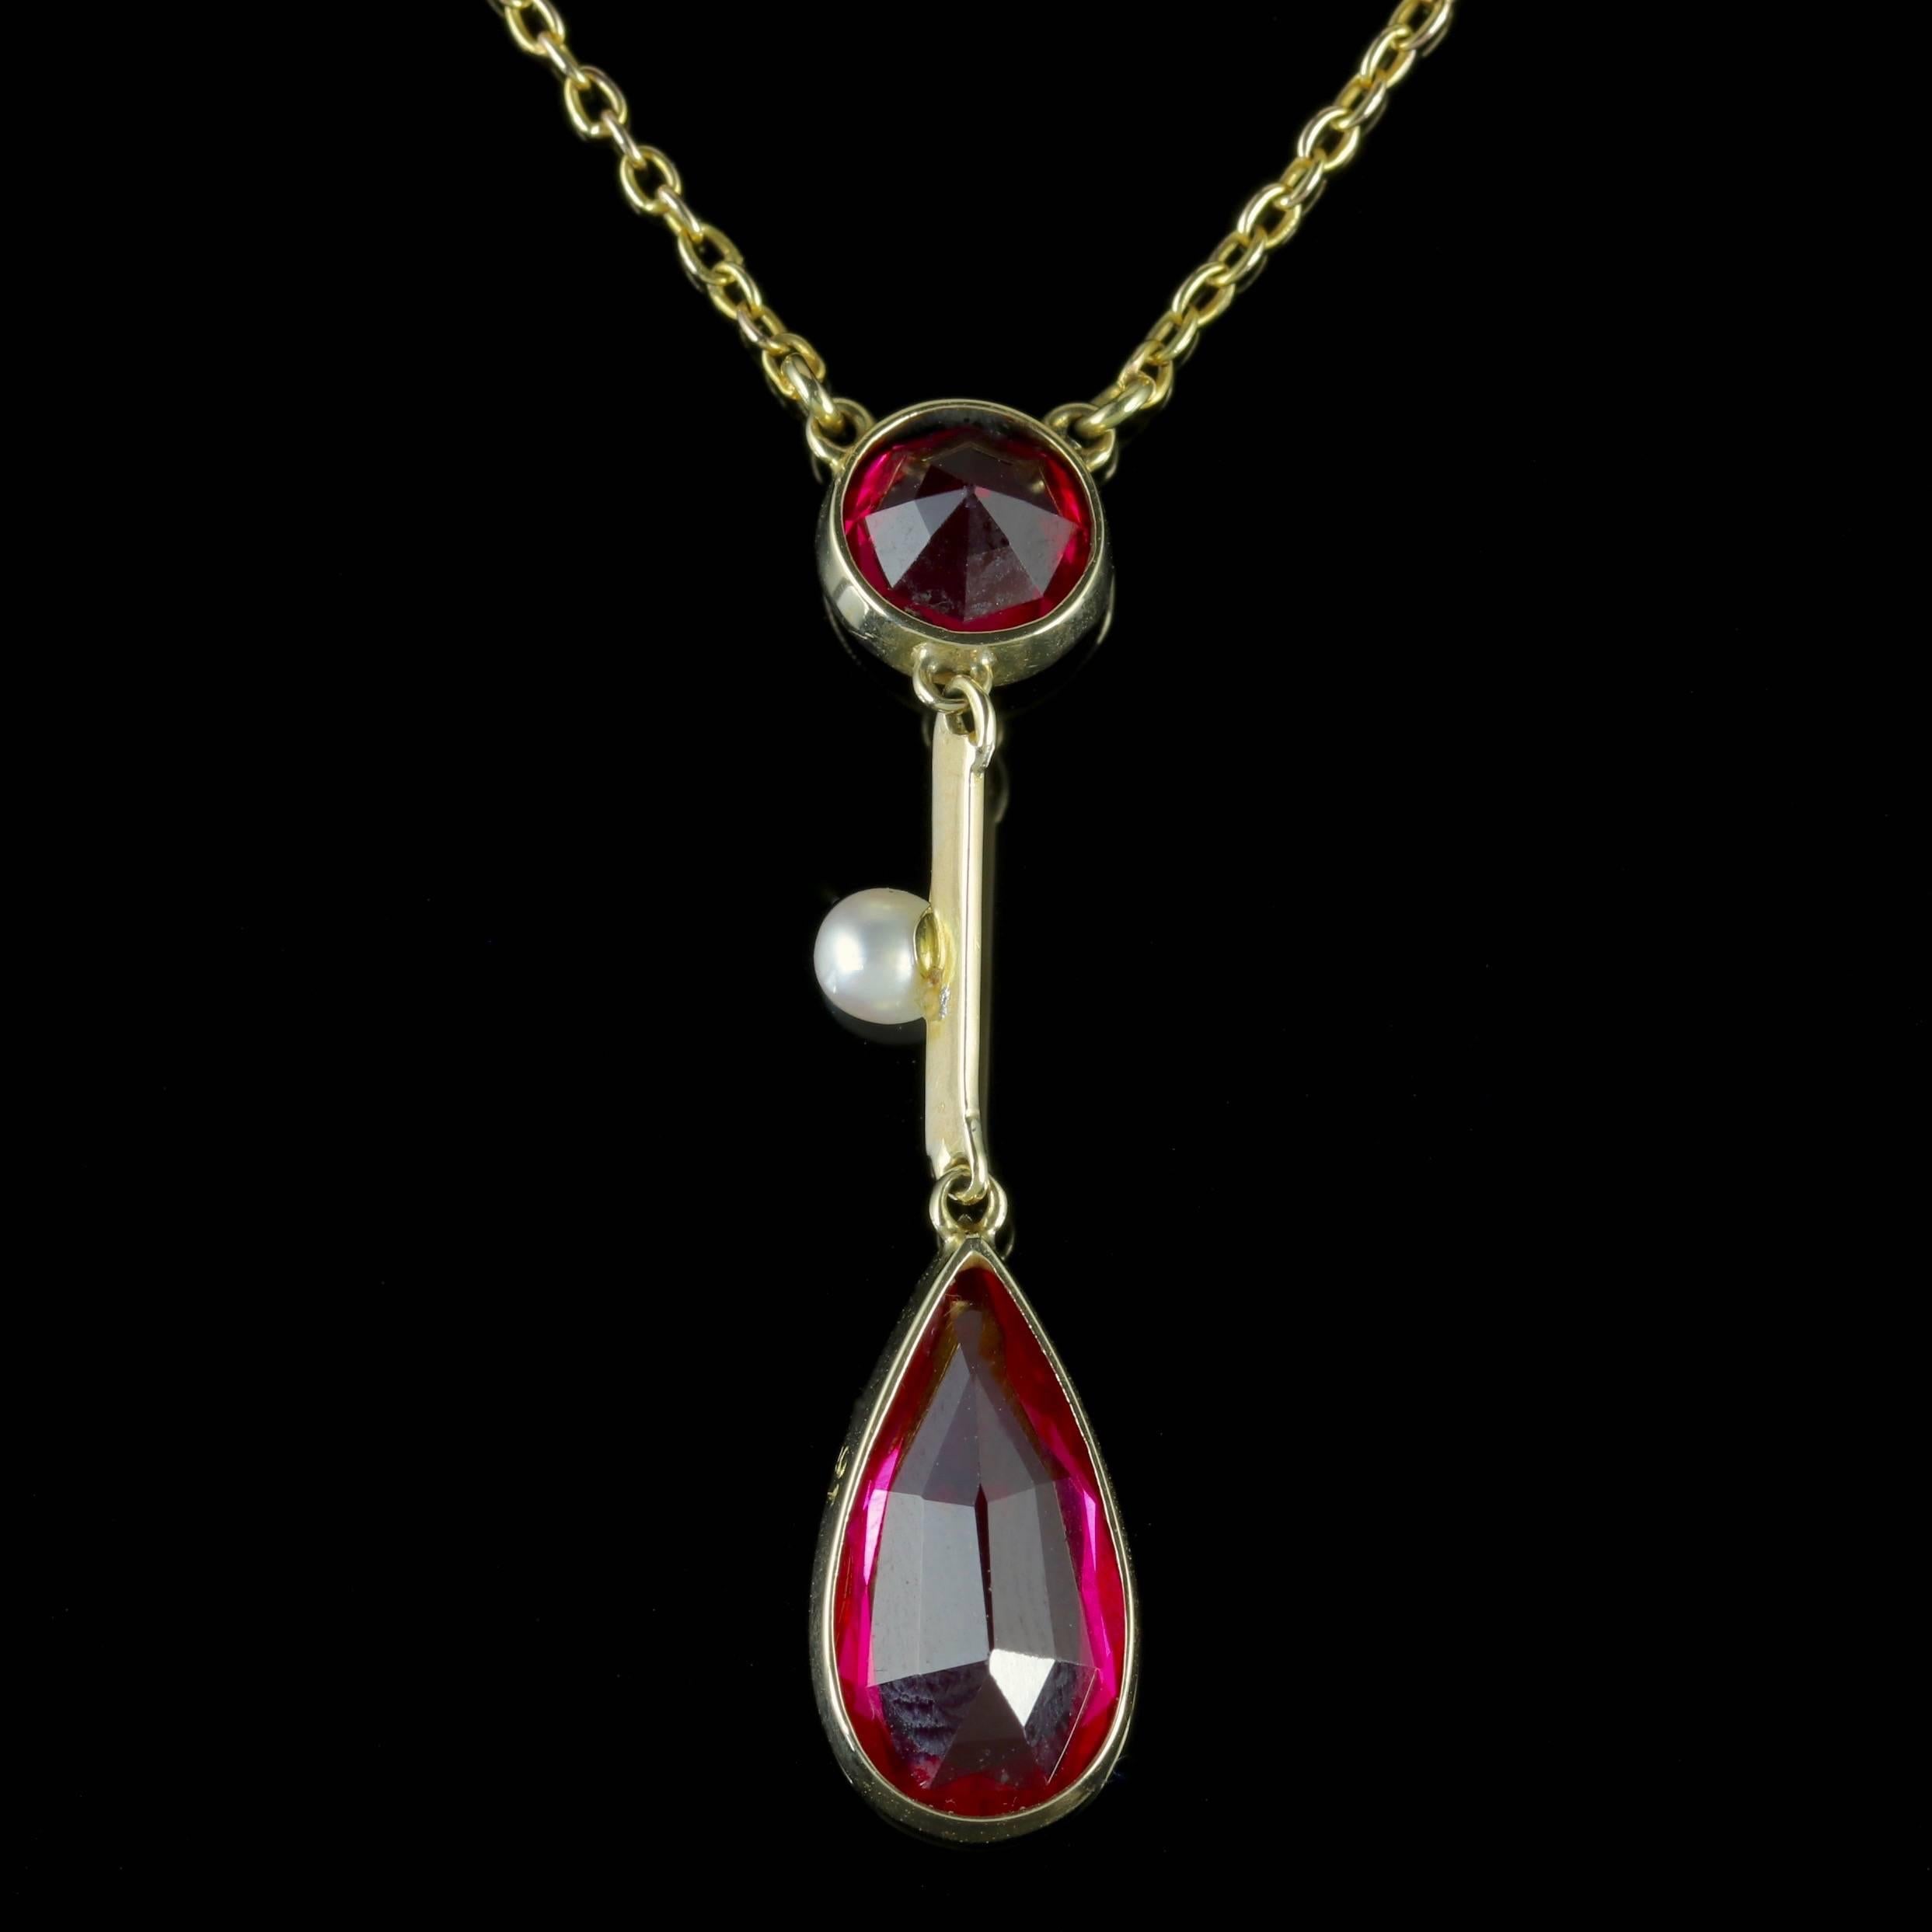 Late Victorian Antique Victorian Ruby Necklace 15 Carat Gold Pearl, circa 1890